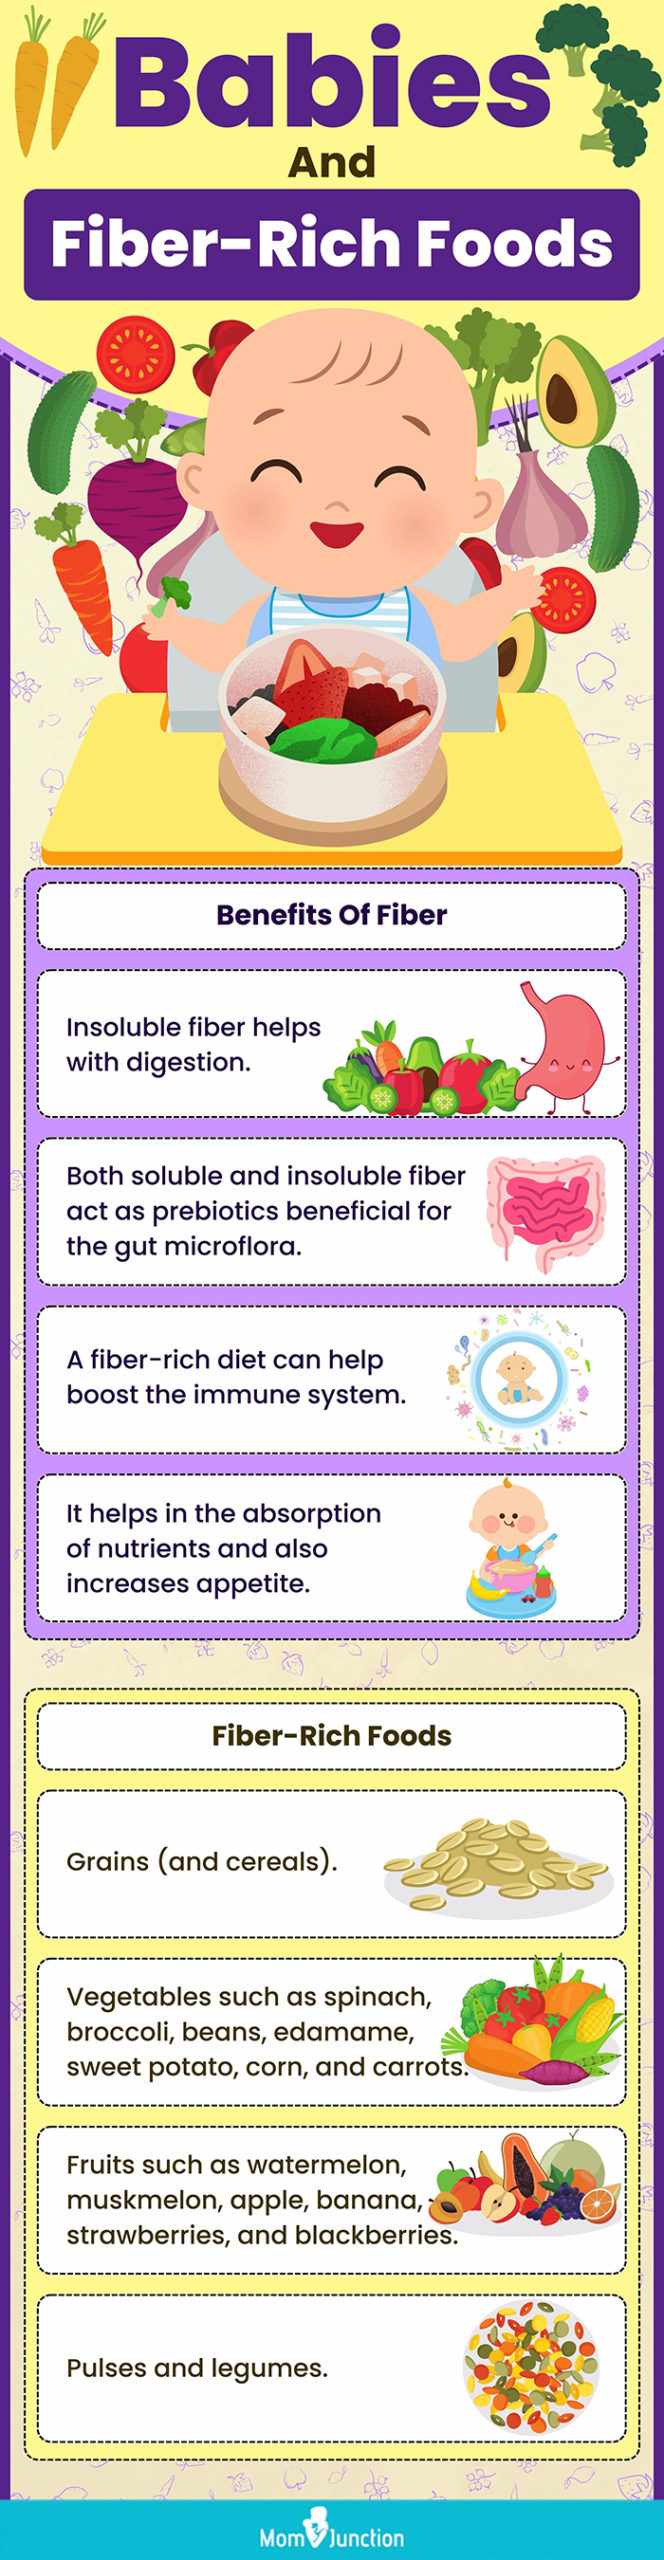 babies and fiber rich foods [infographic]